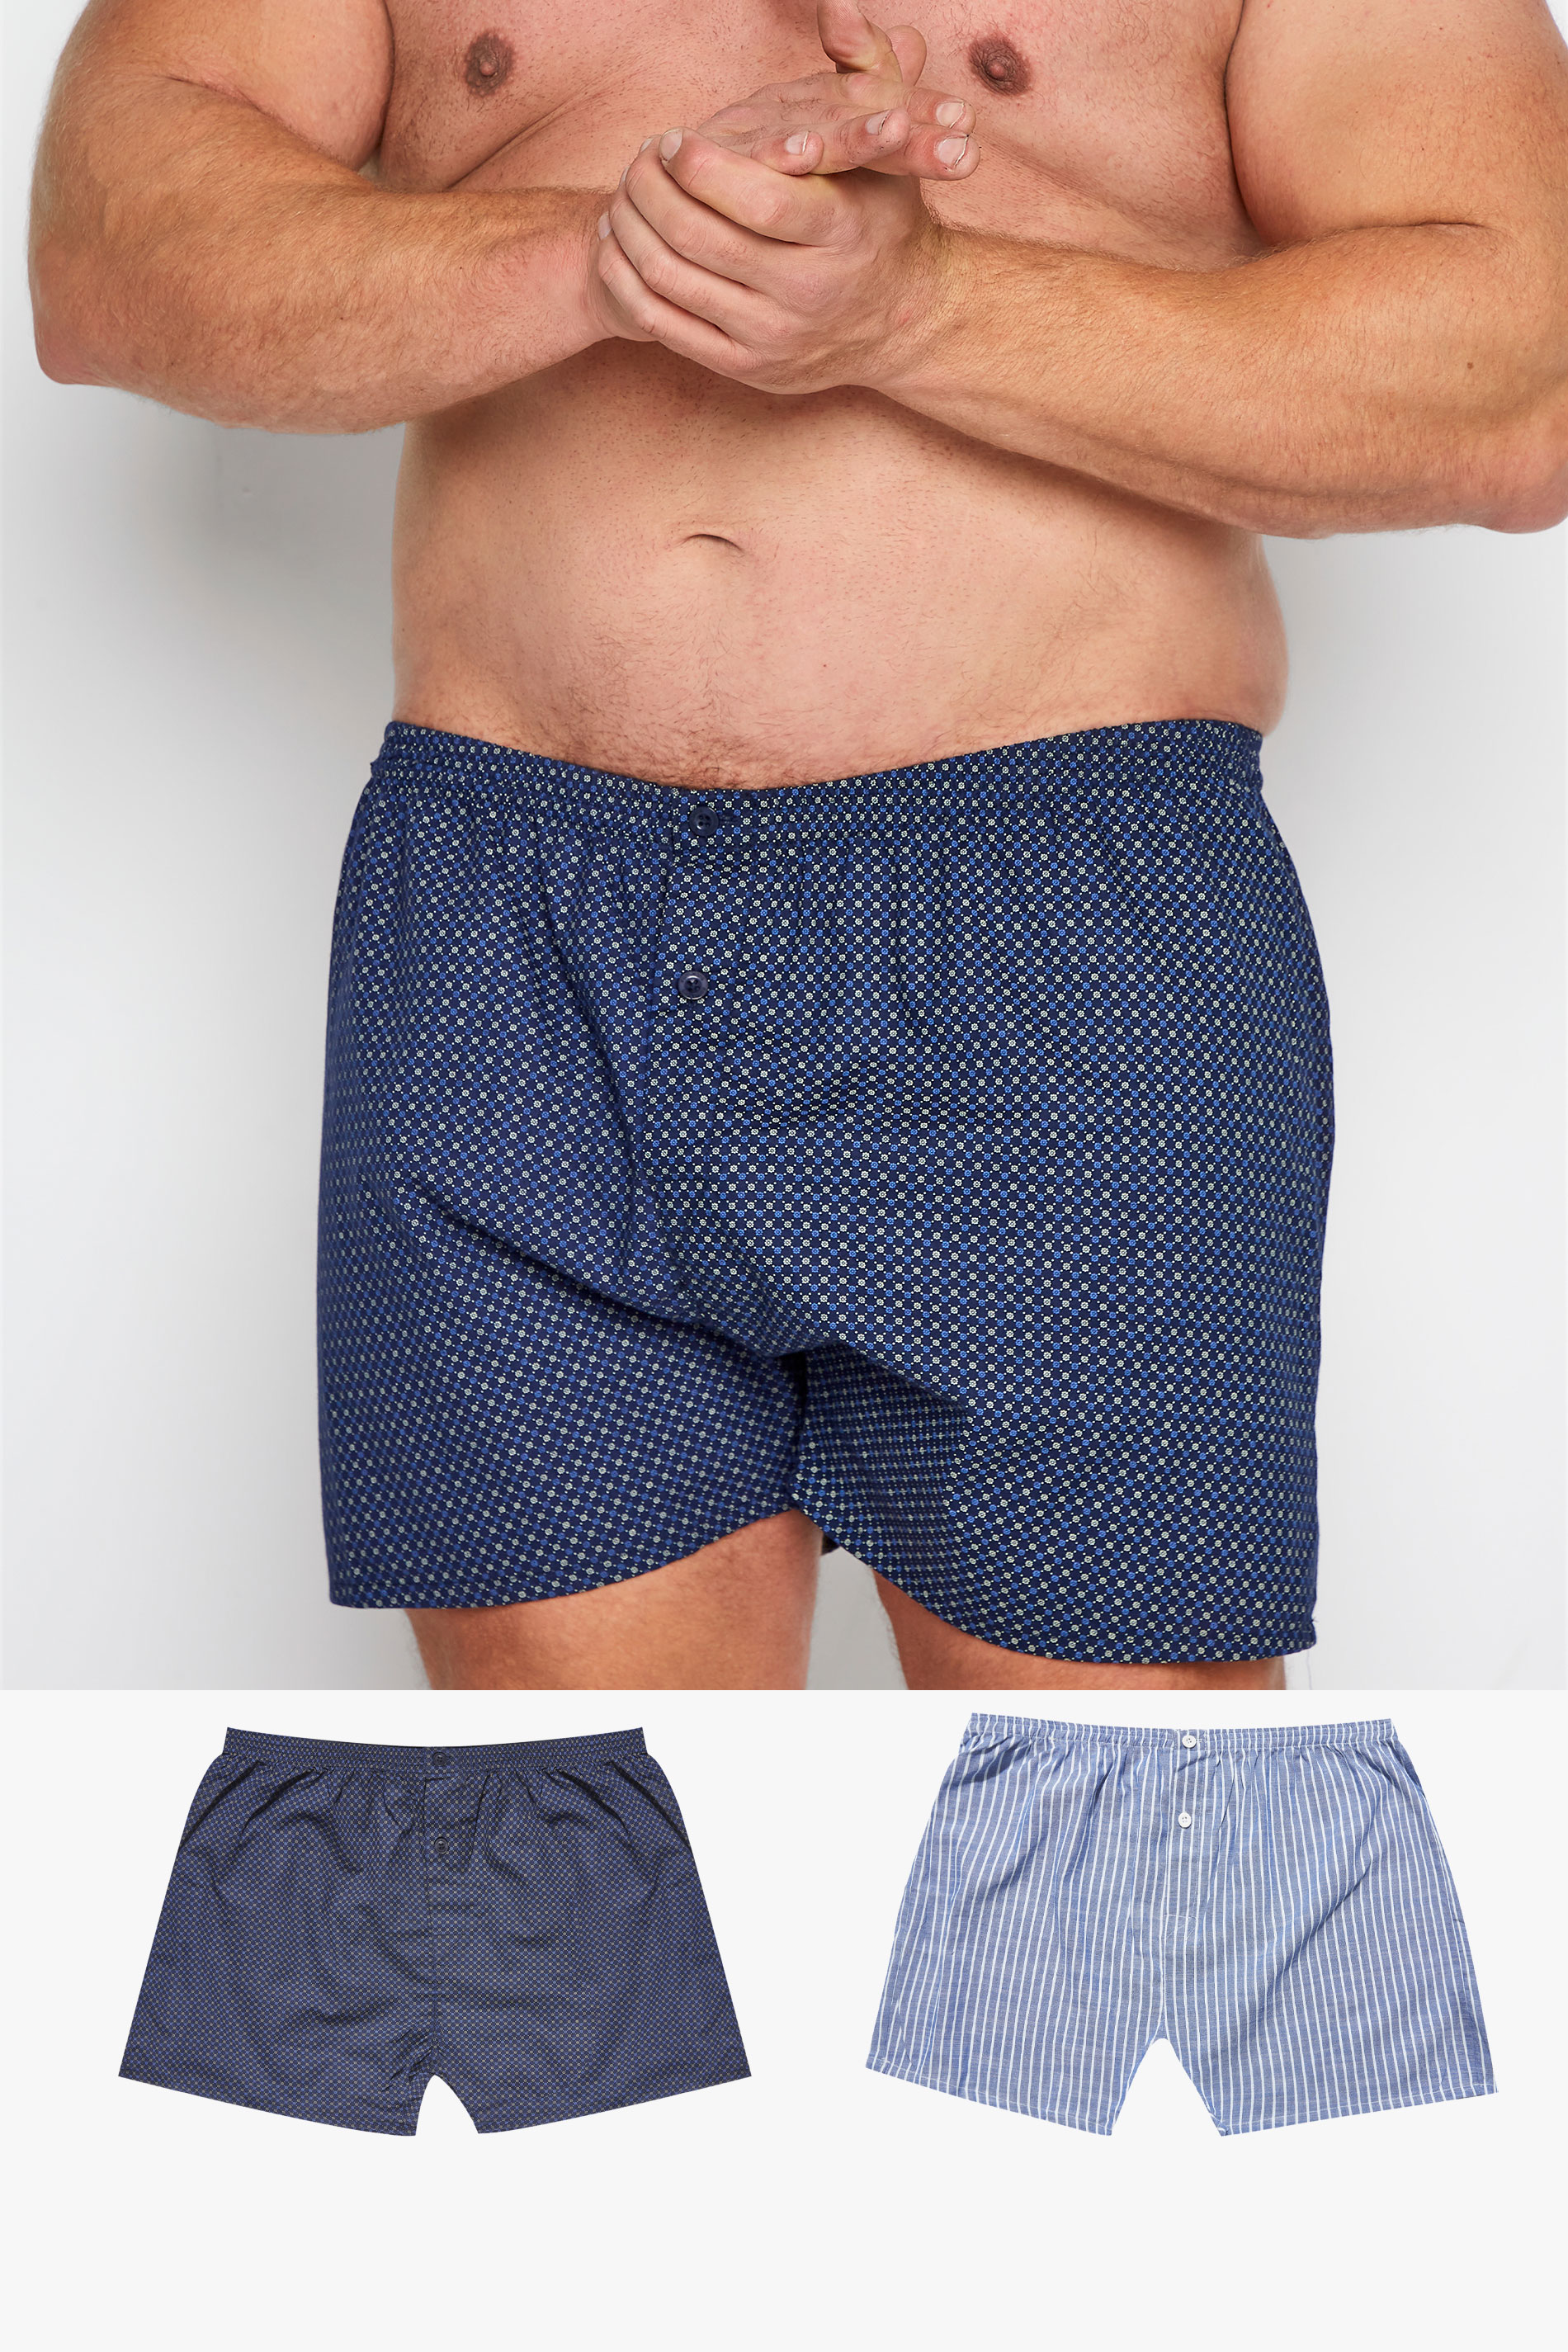 KAM 2 PACK Blue Woven Boxers_A.jpg